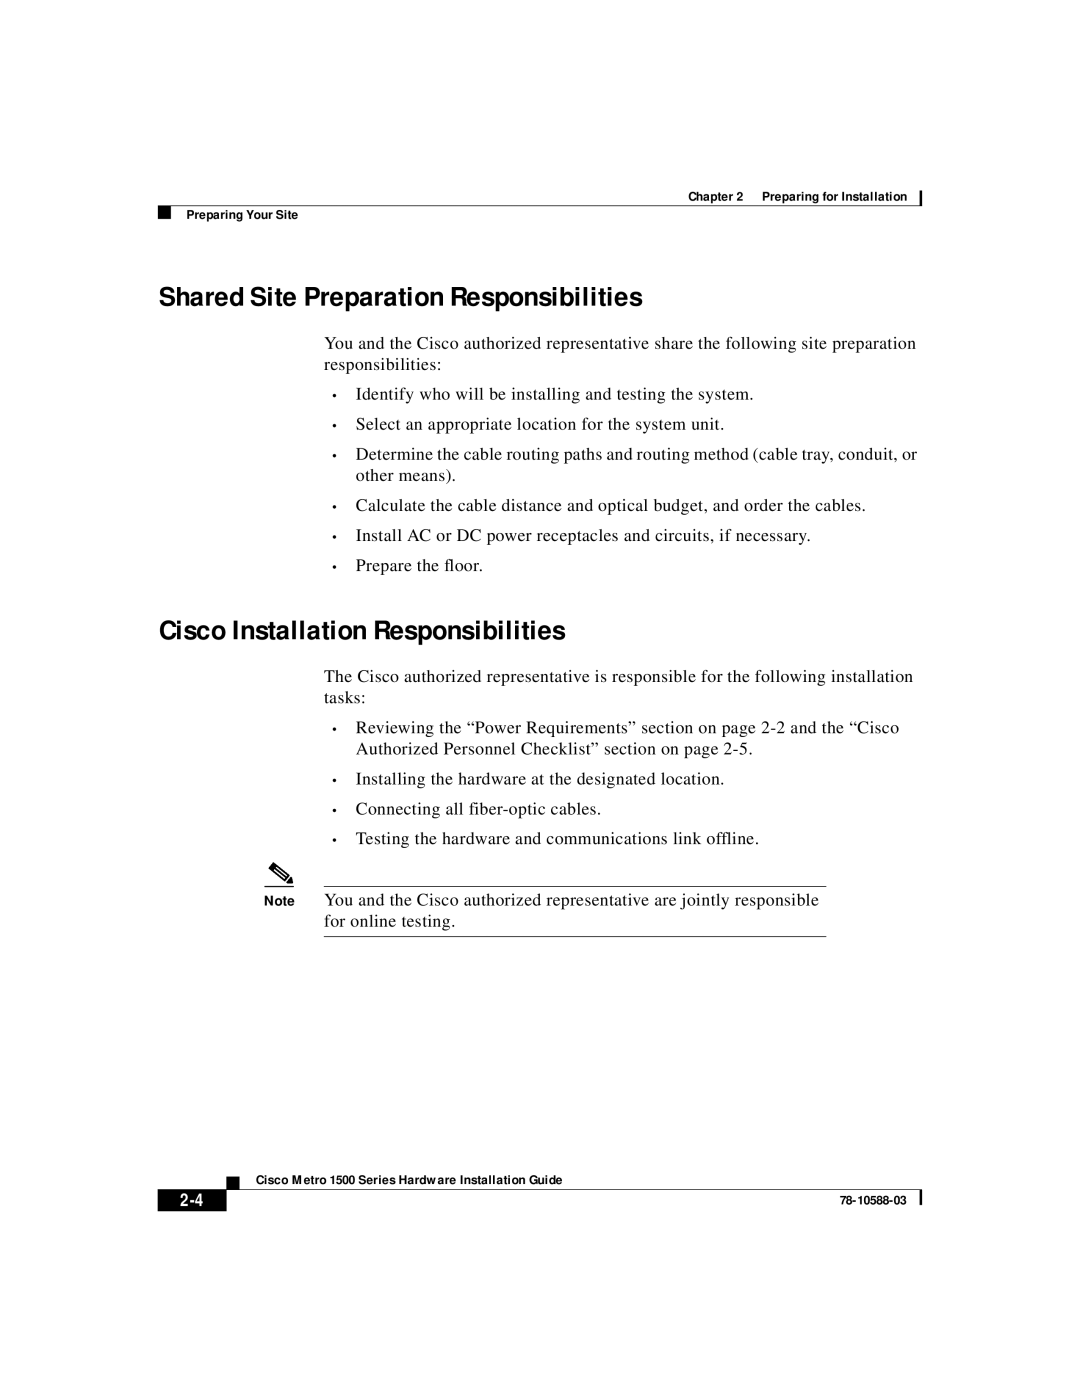 Cisco Systems 1500 manual Shared Site Preparation Responsibilities, Cisco Installation Responsibilities 